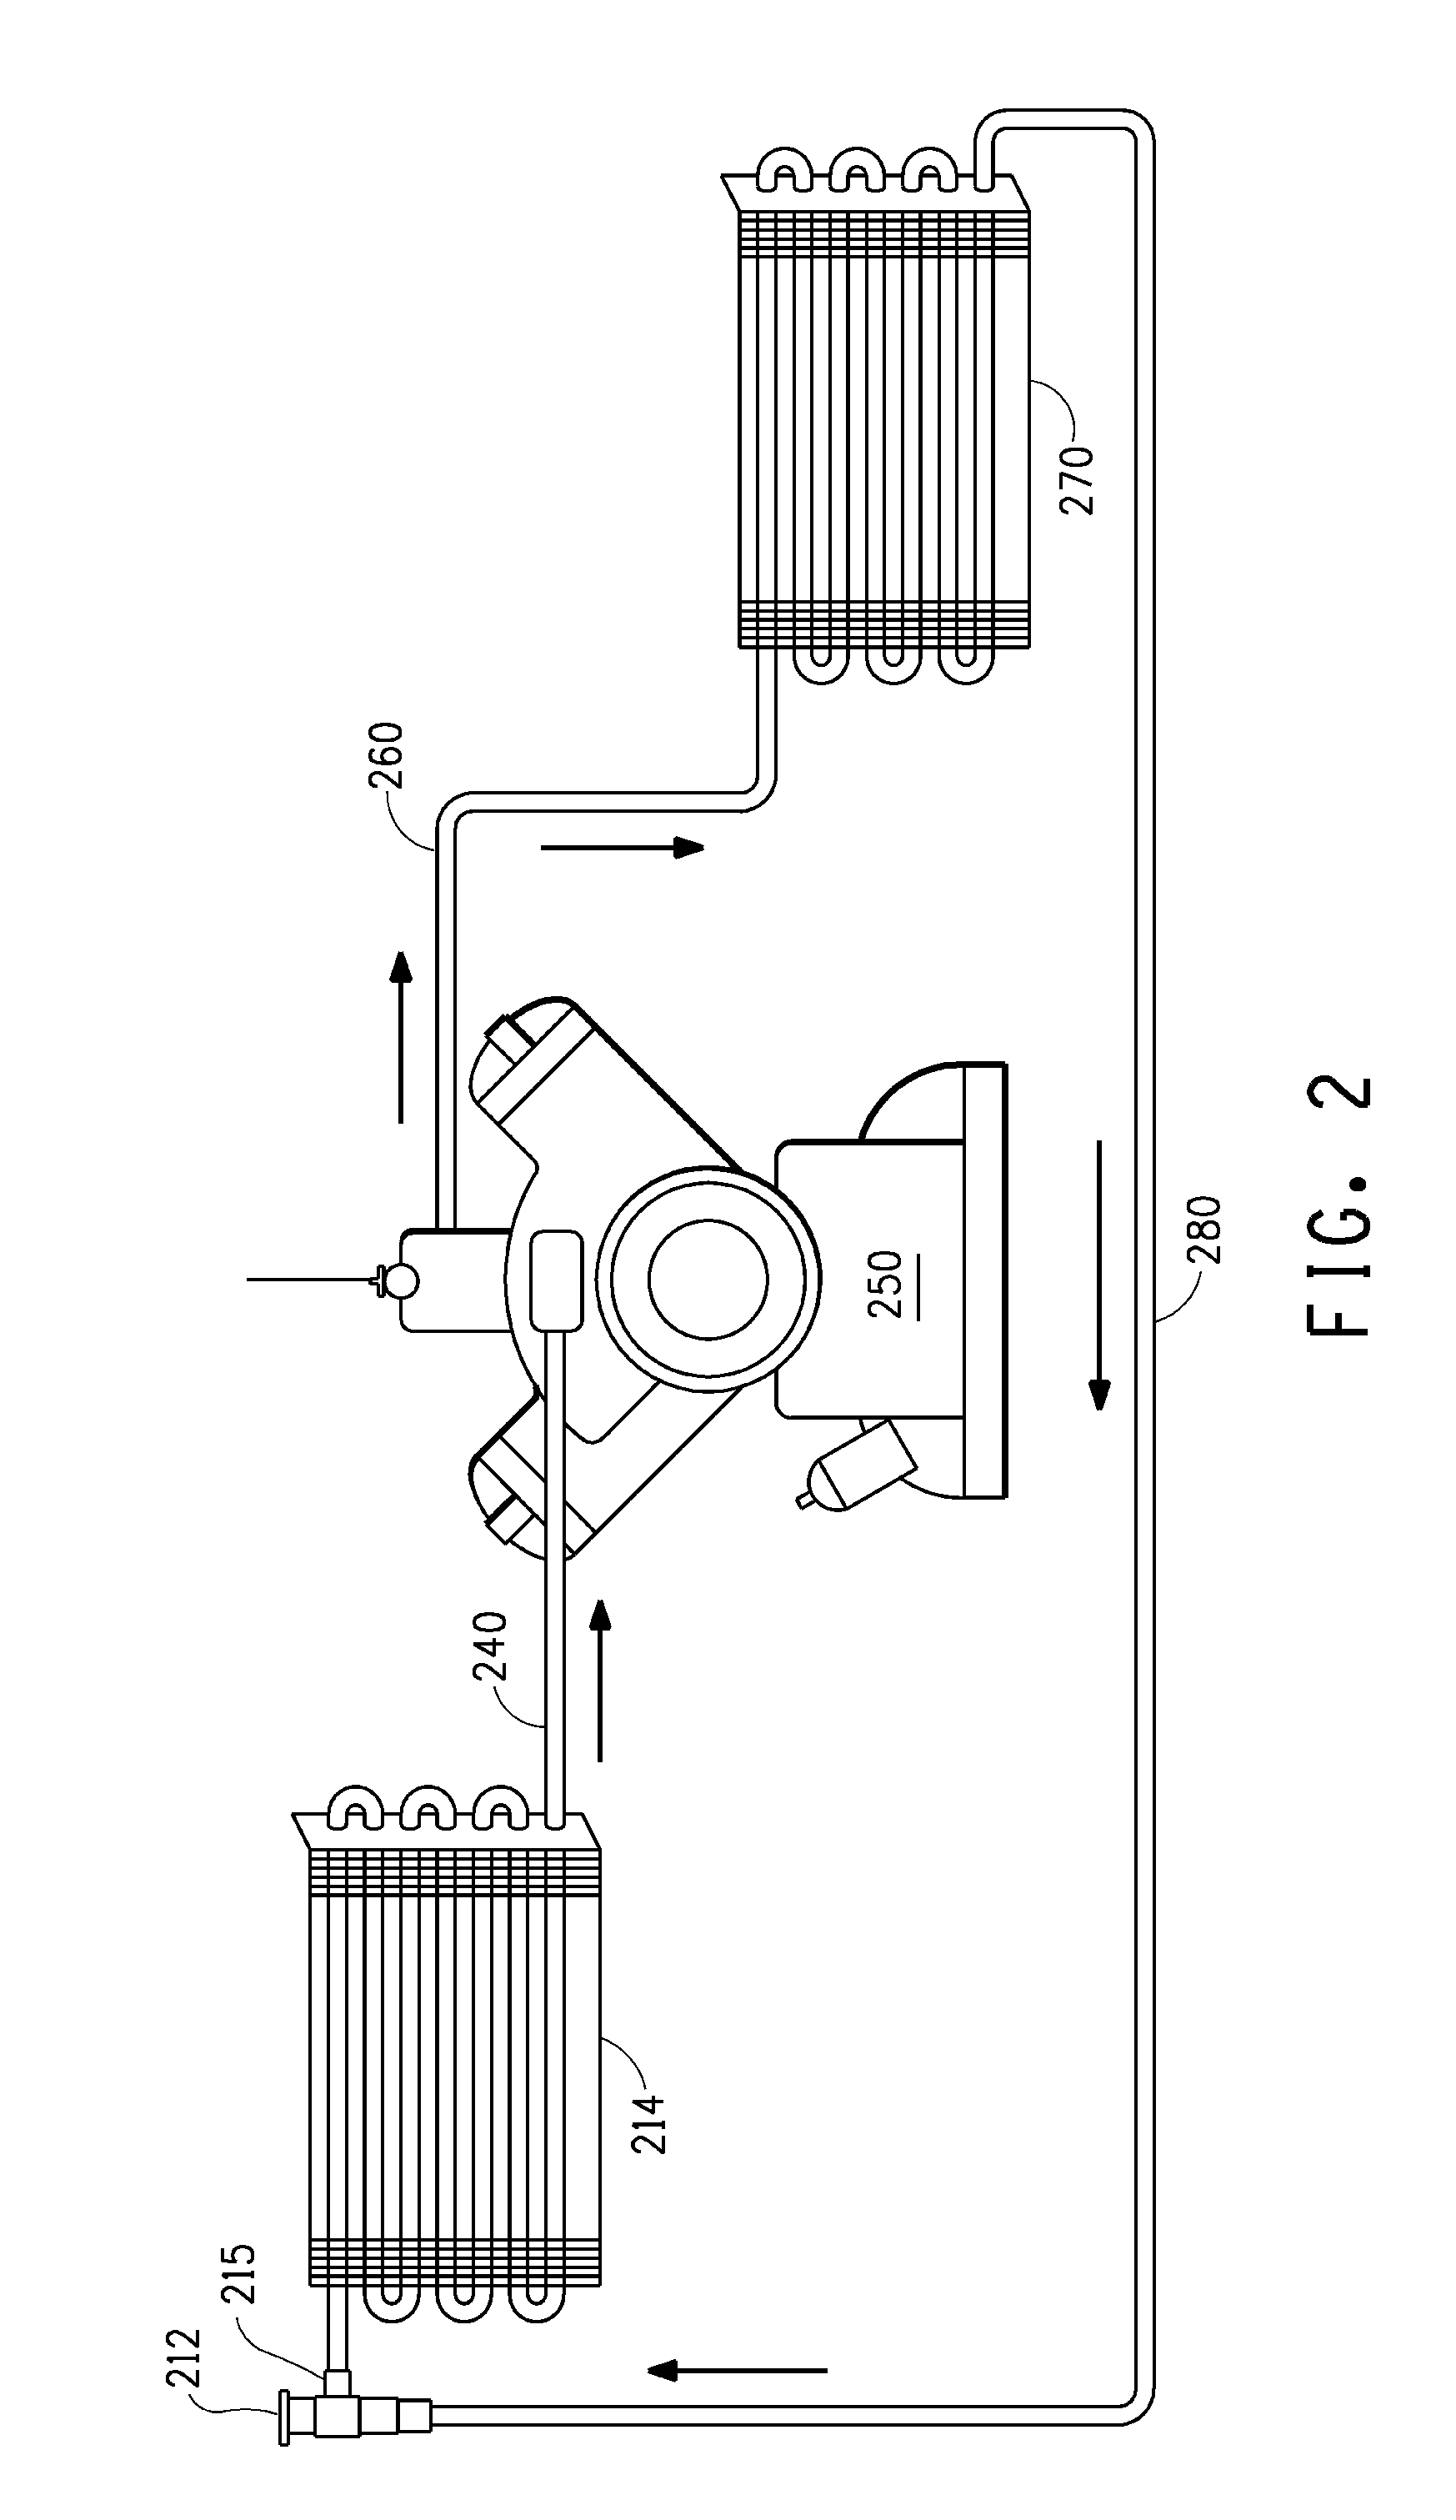 Fluorinated compositions and systems using such compositions